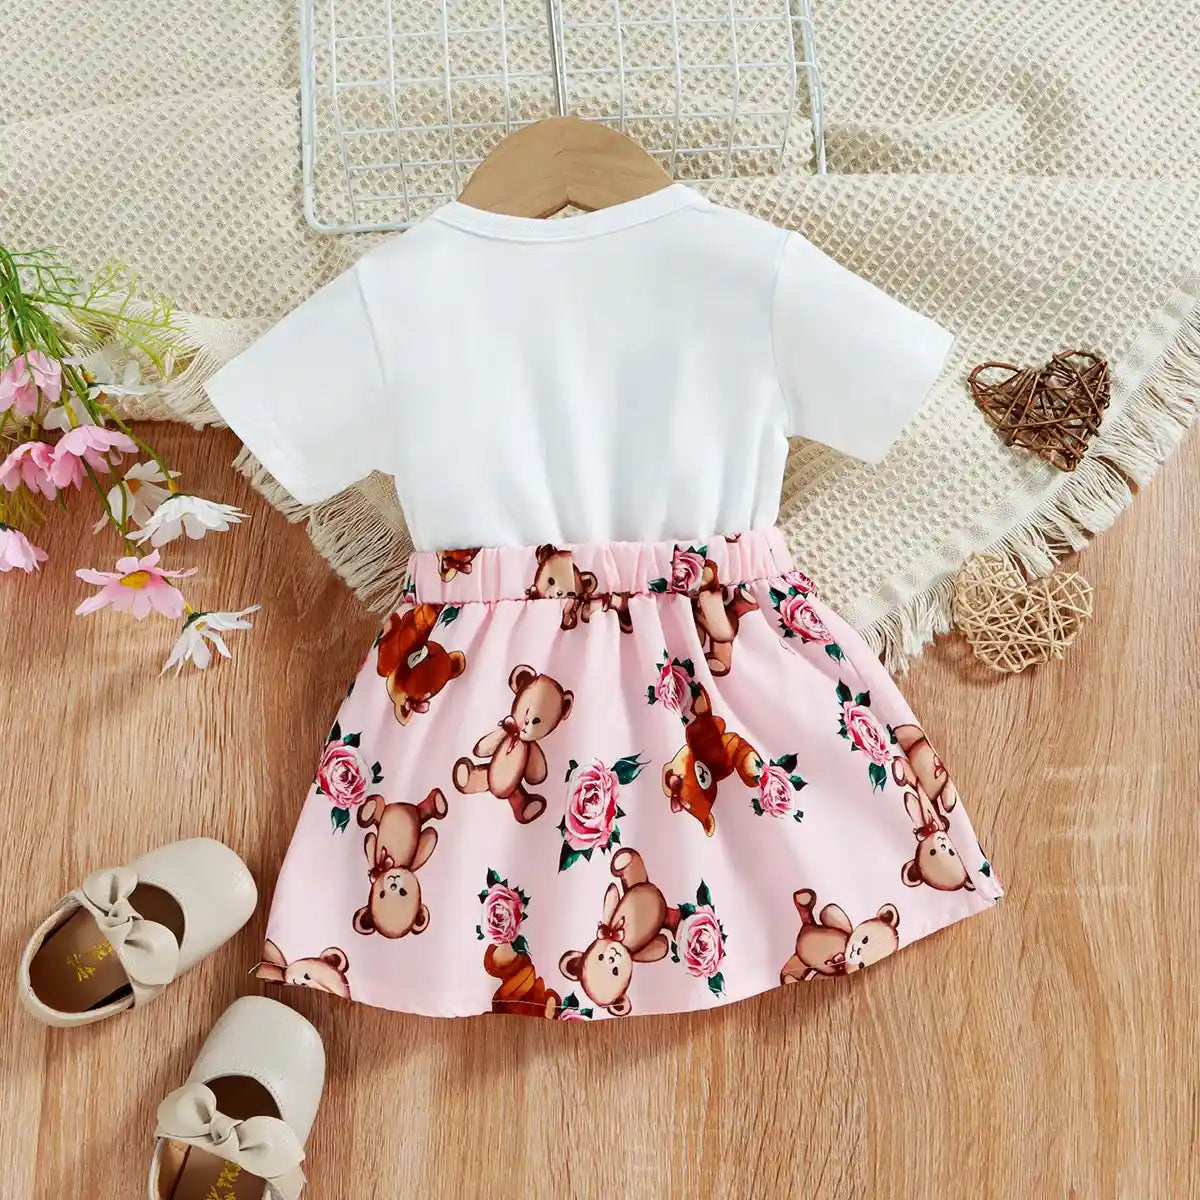 Summer Dresses for Baby Girls | Sweet Cartoon Bear Prints - For all baby